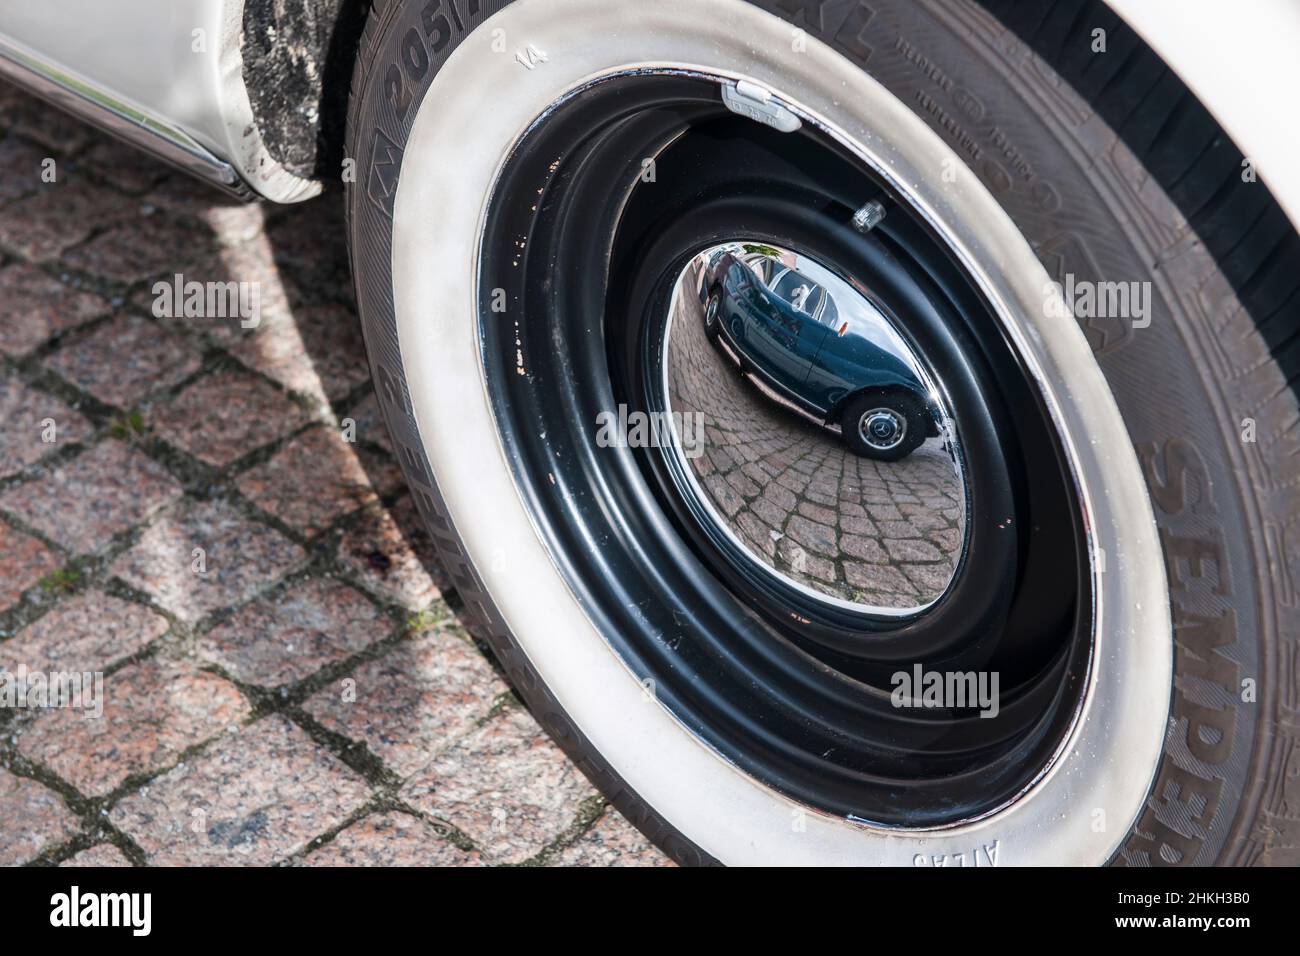 Close-up view of a vintage car tire with a chrome-plated hubcap and the mirror image of another German vintage car that can be seen in it. Stock Photo